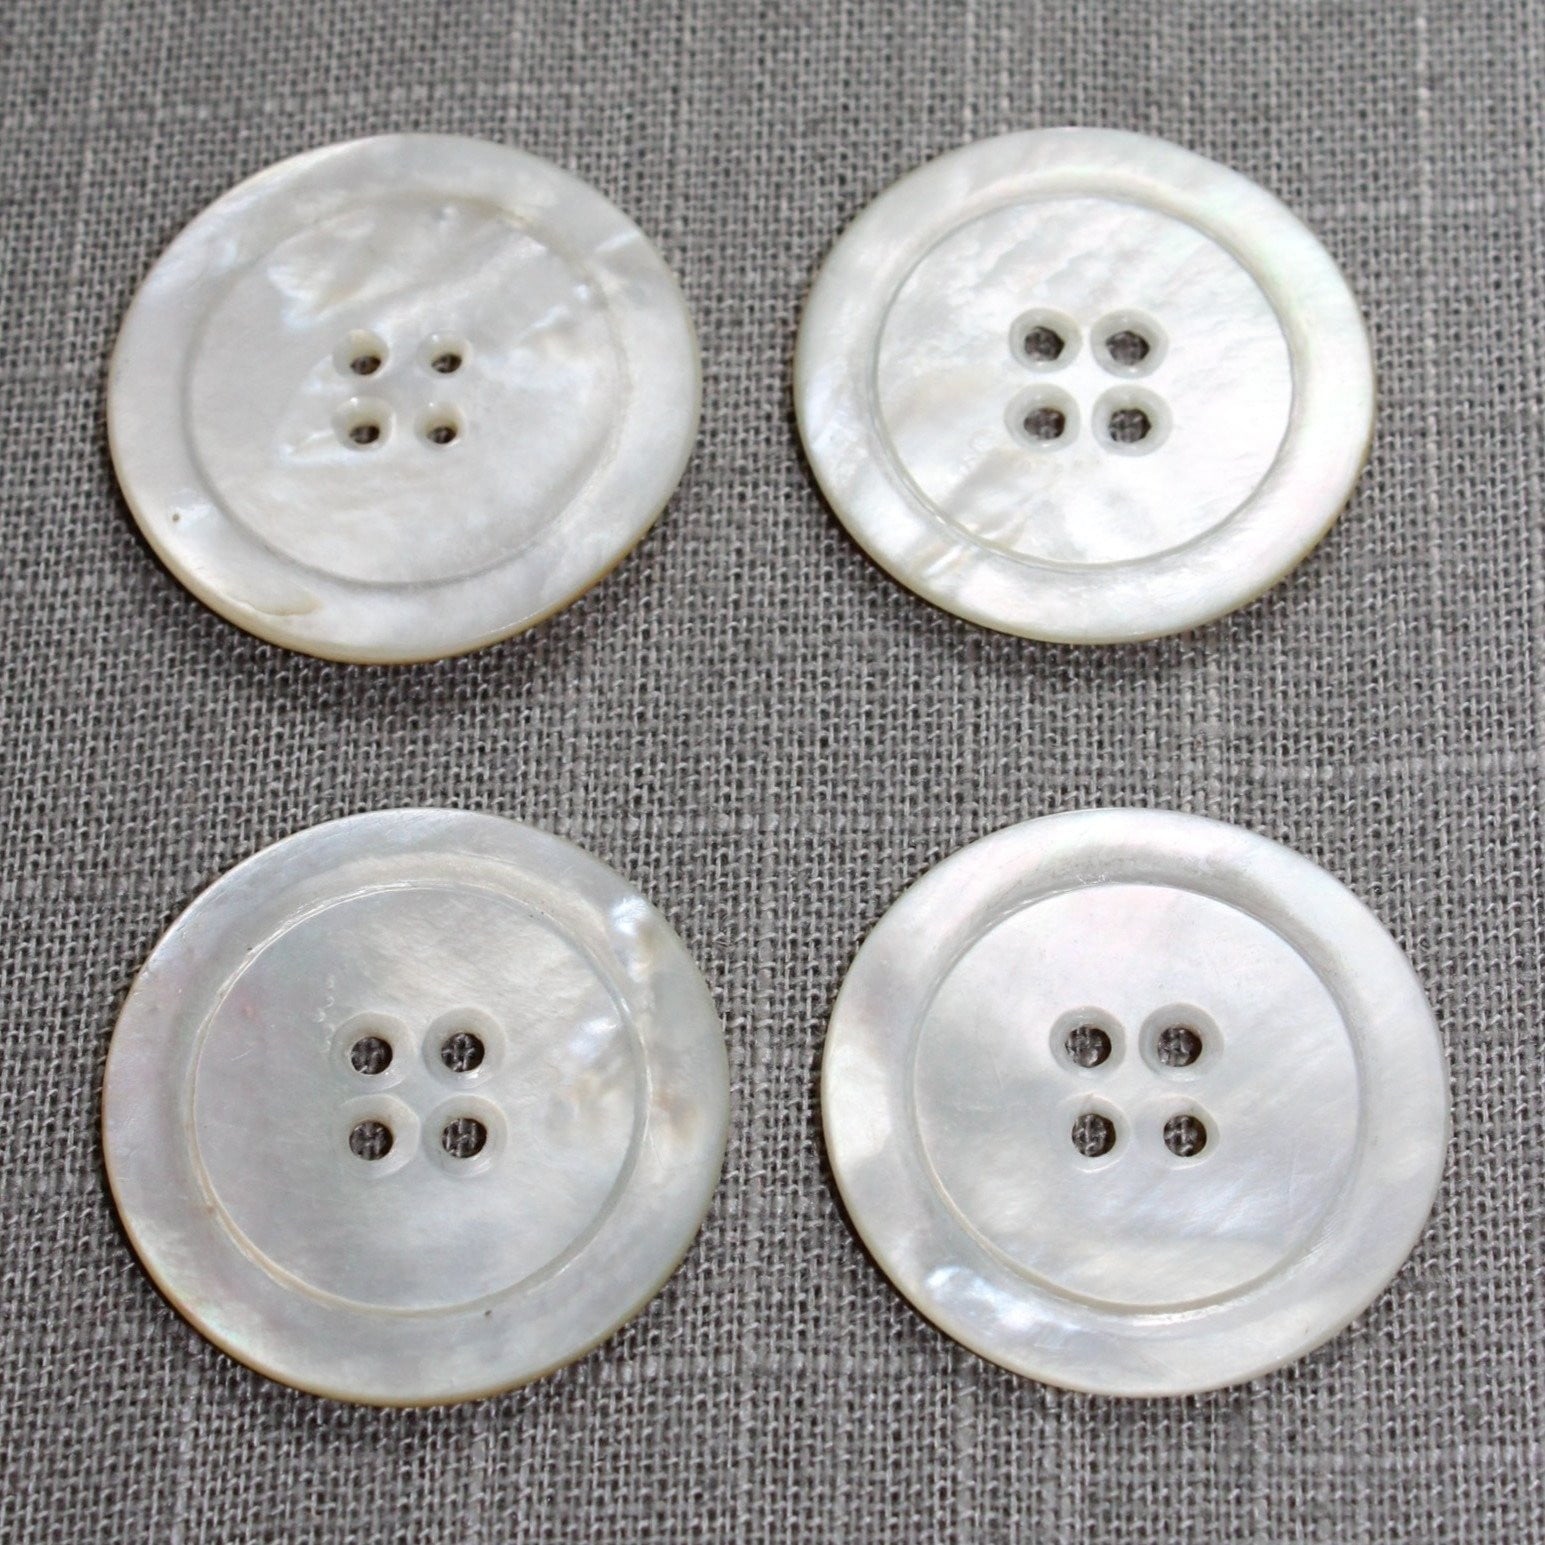 Vintage Pearl Buttons 1 7/16" White Natural MOP Lot 4 Buttons